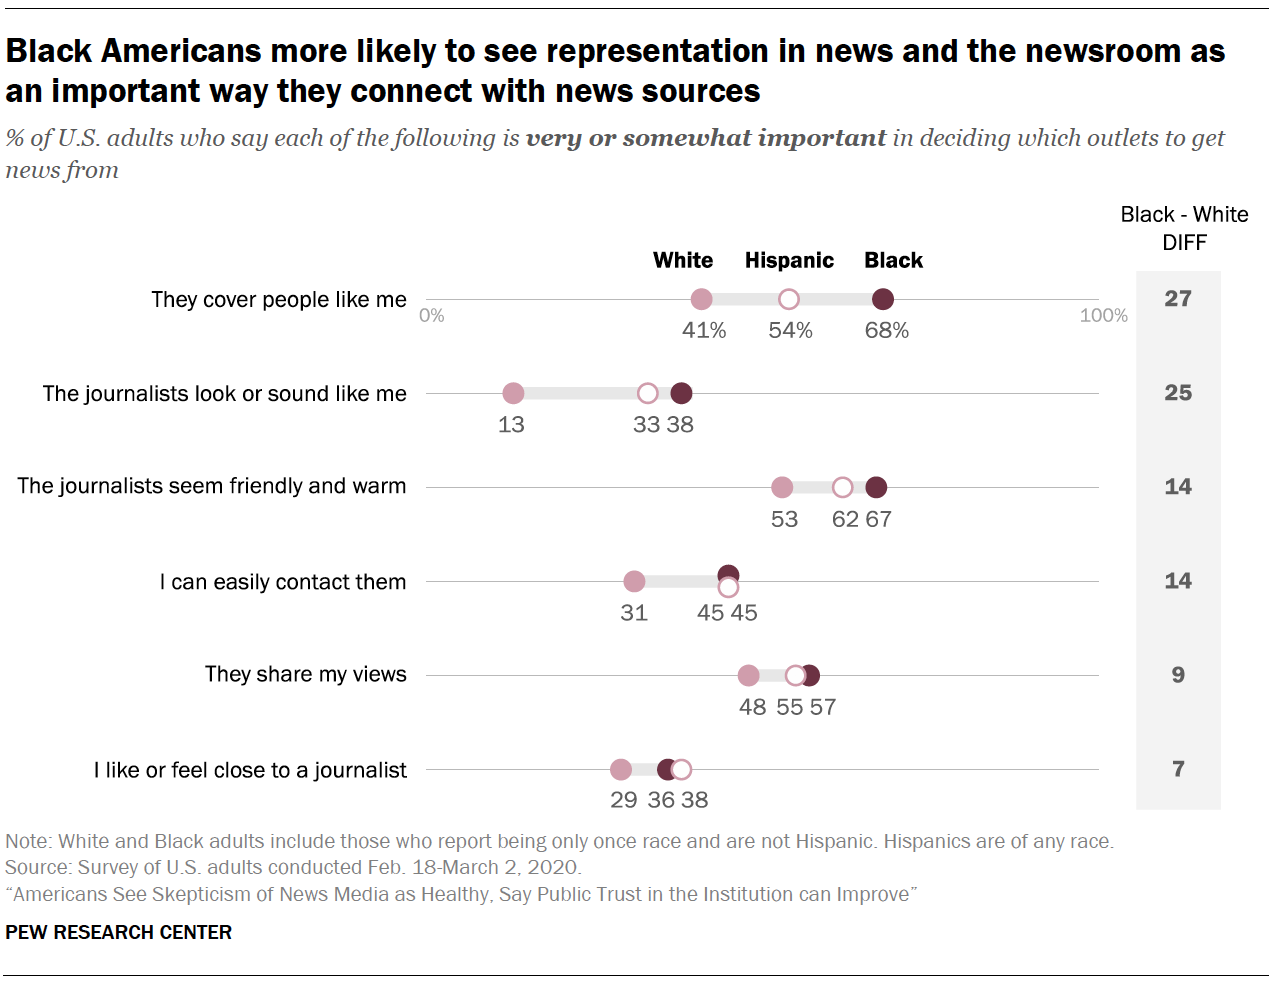 Black Americans more likely to see representation in news and the newsroom as an important way they connect with news sources